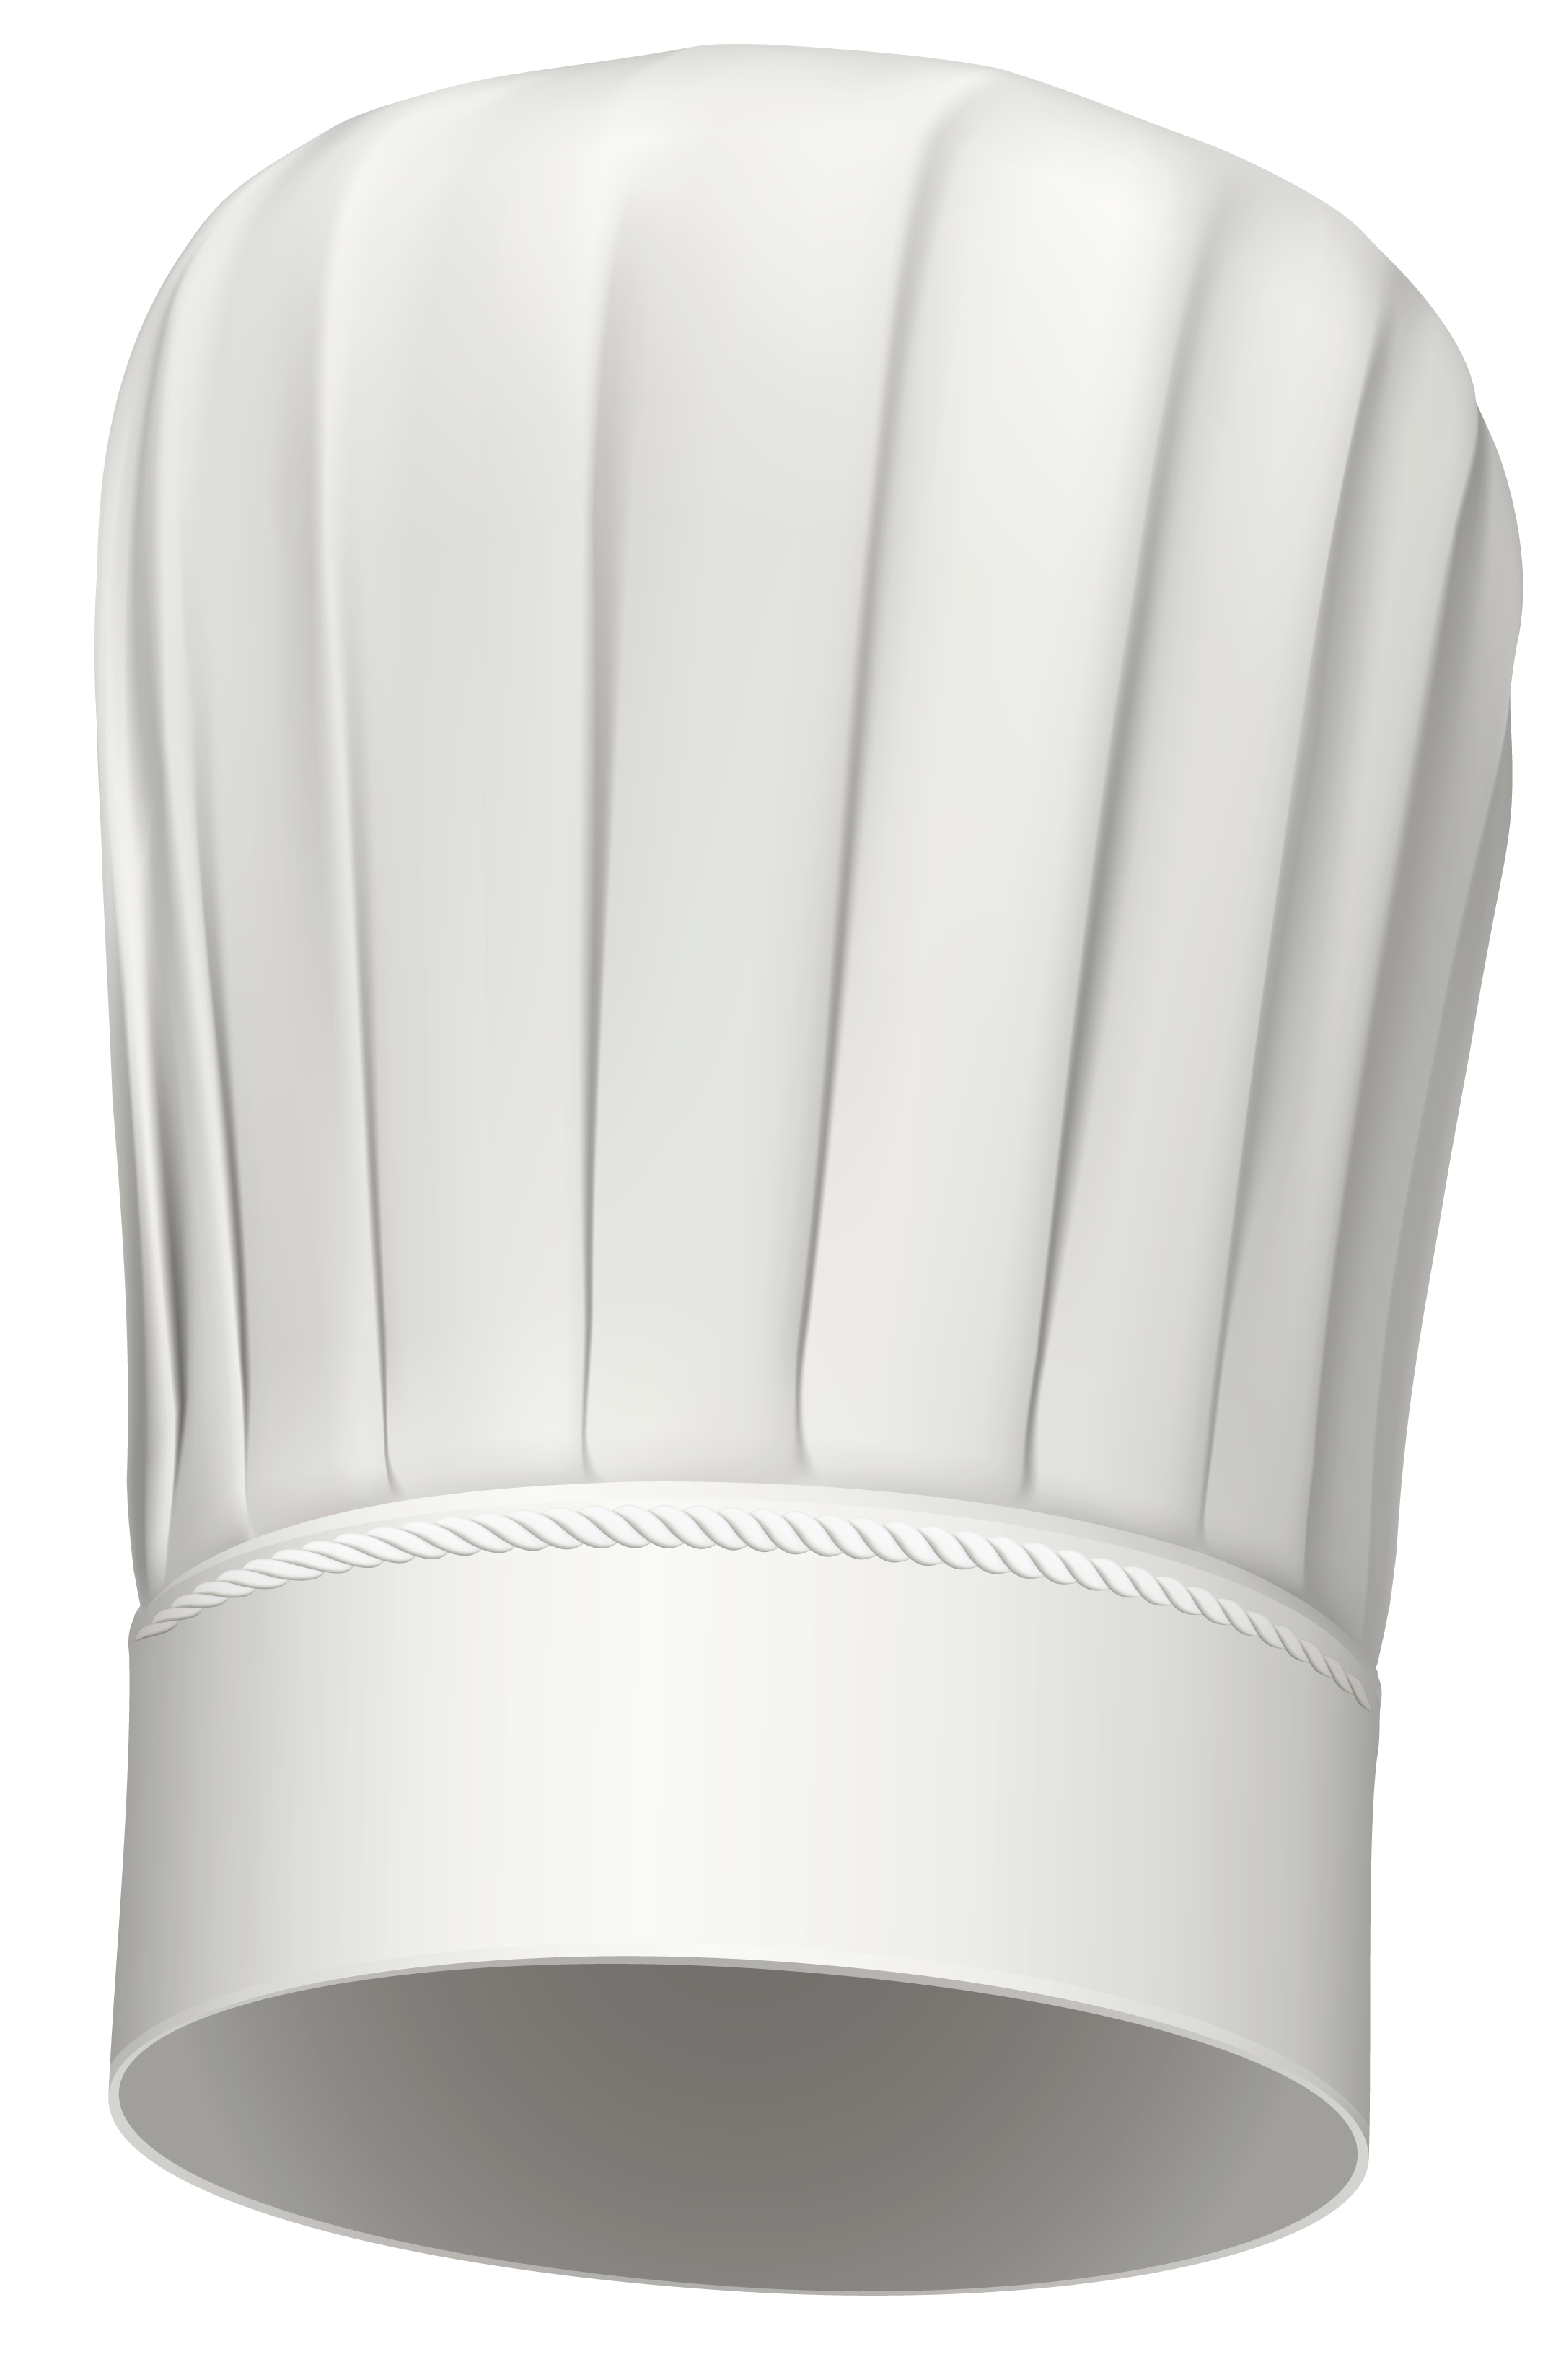 free clipart images chef hat - photo #35